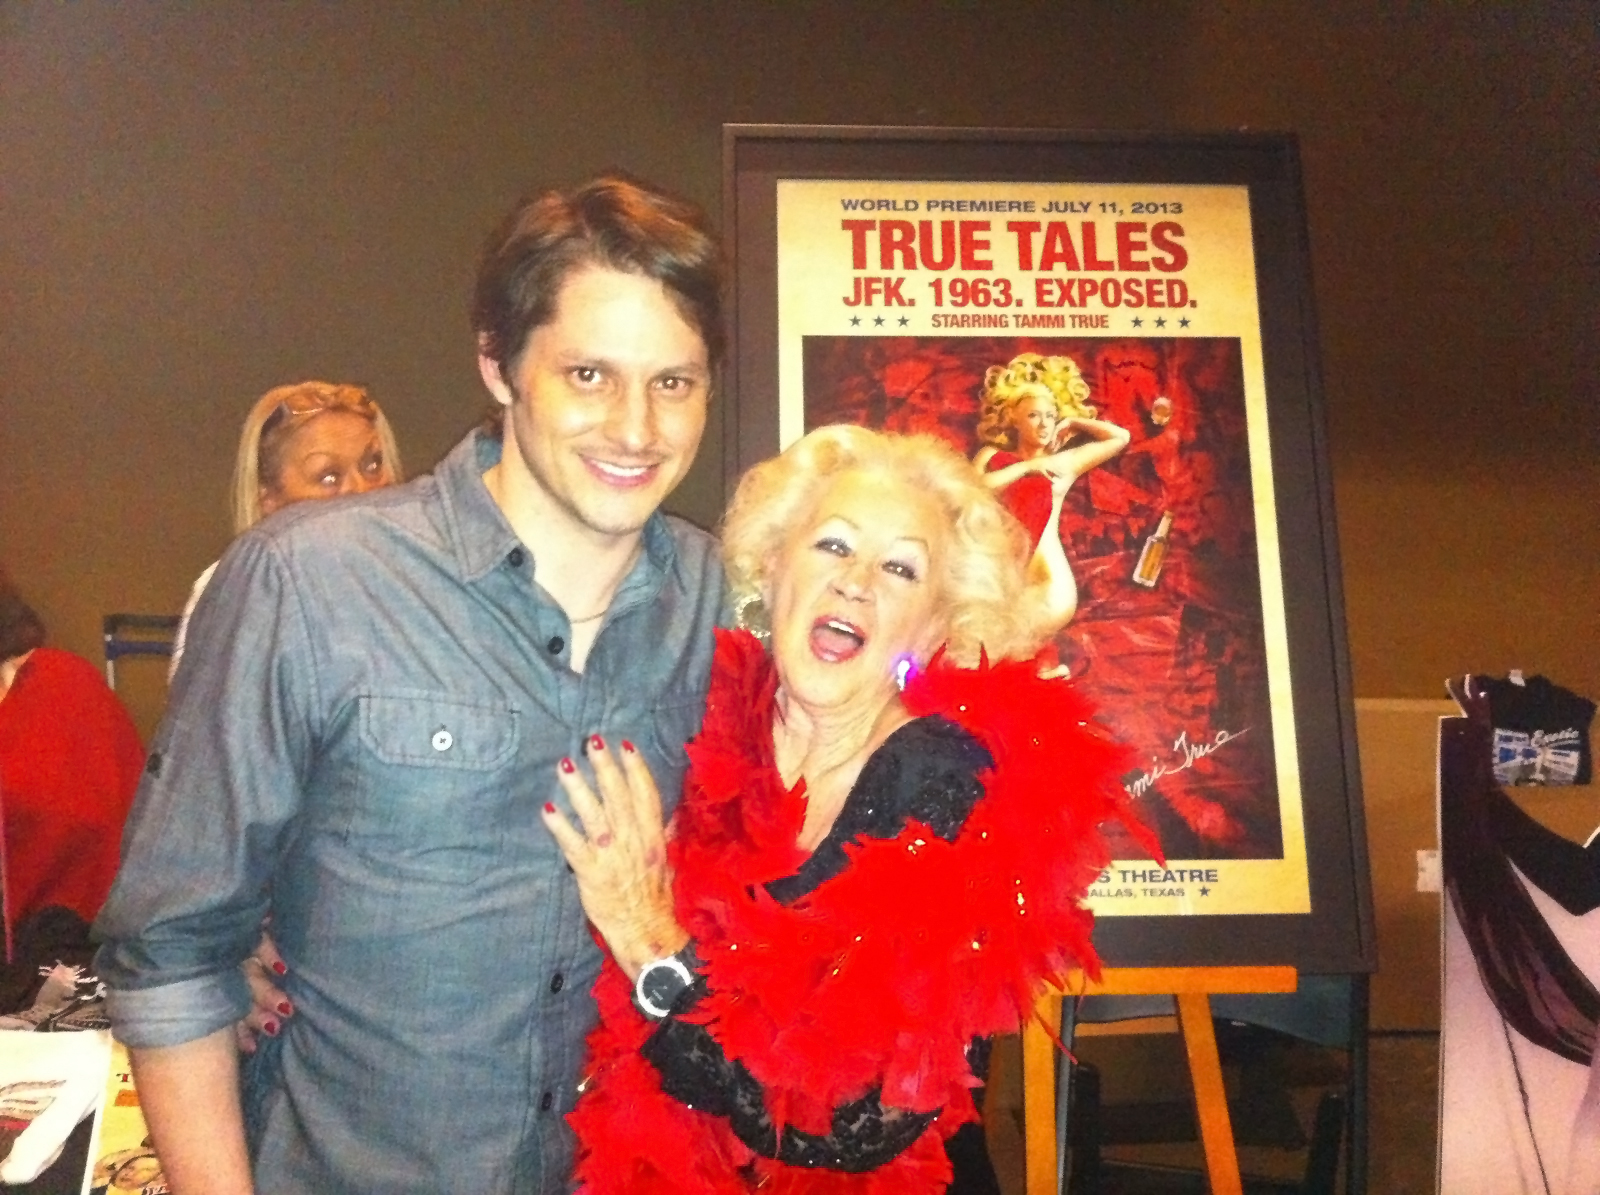 Stephen Brodie with Tammi True at the premiere of True Tales